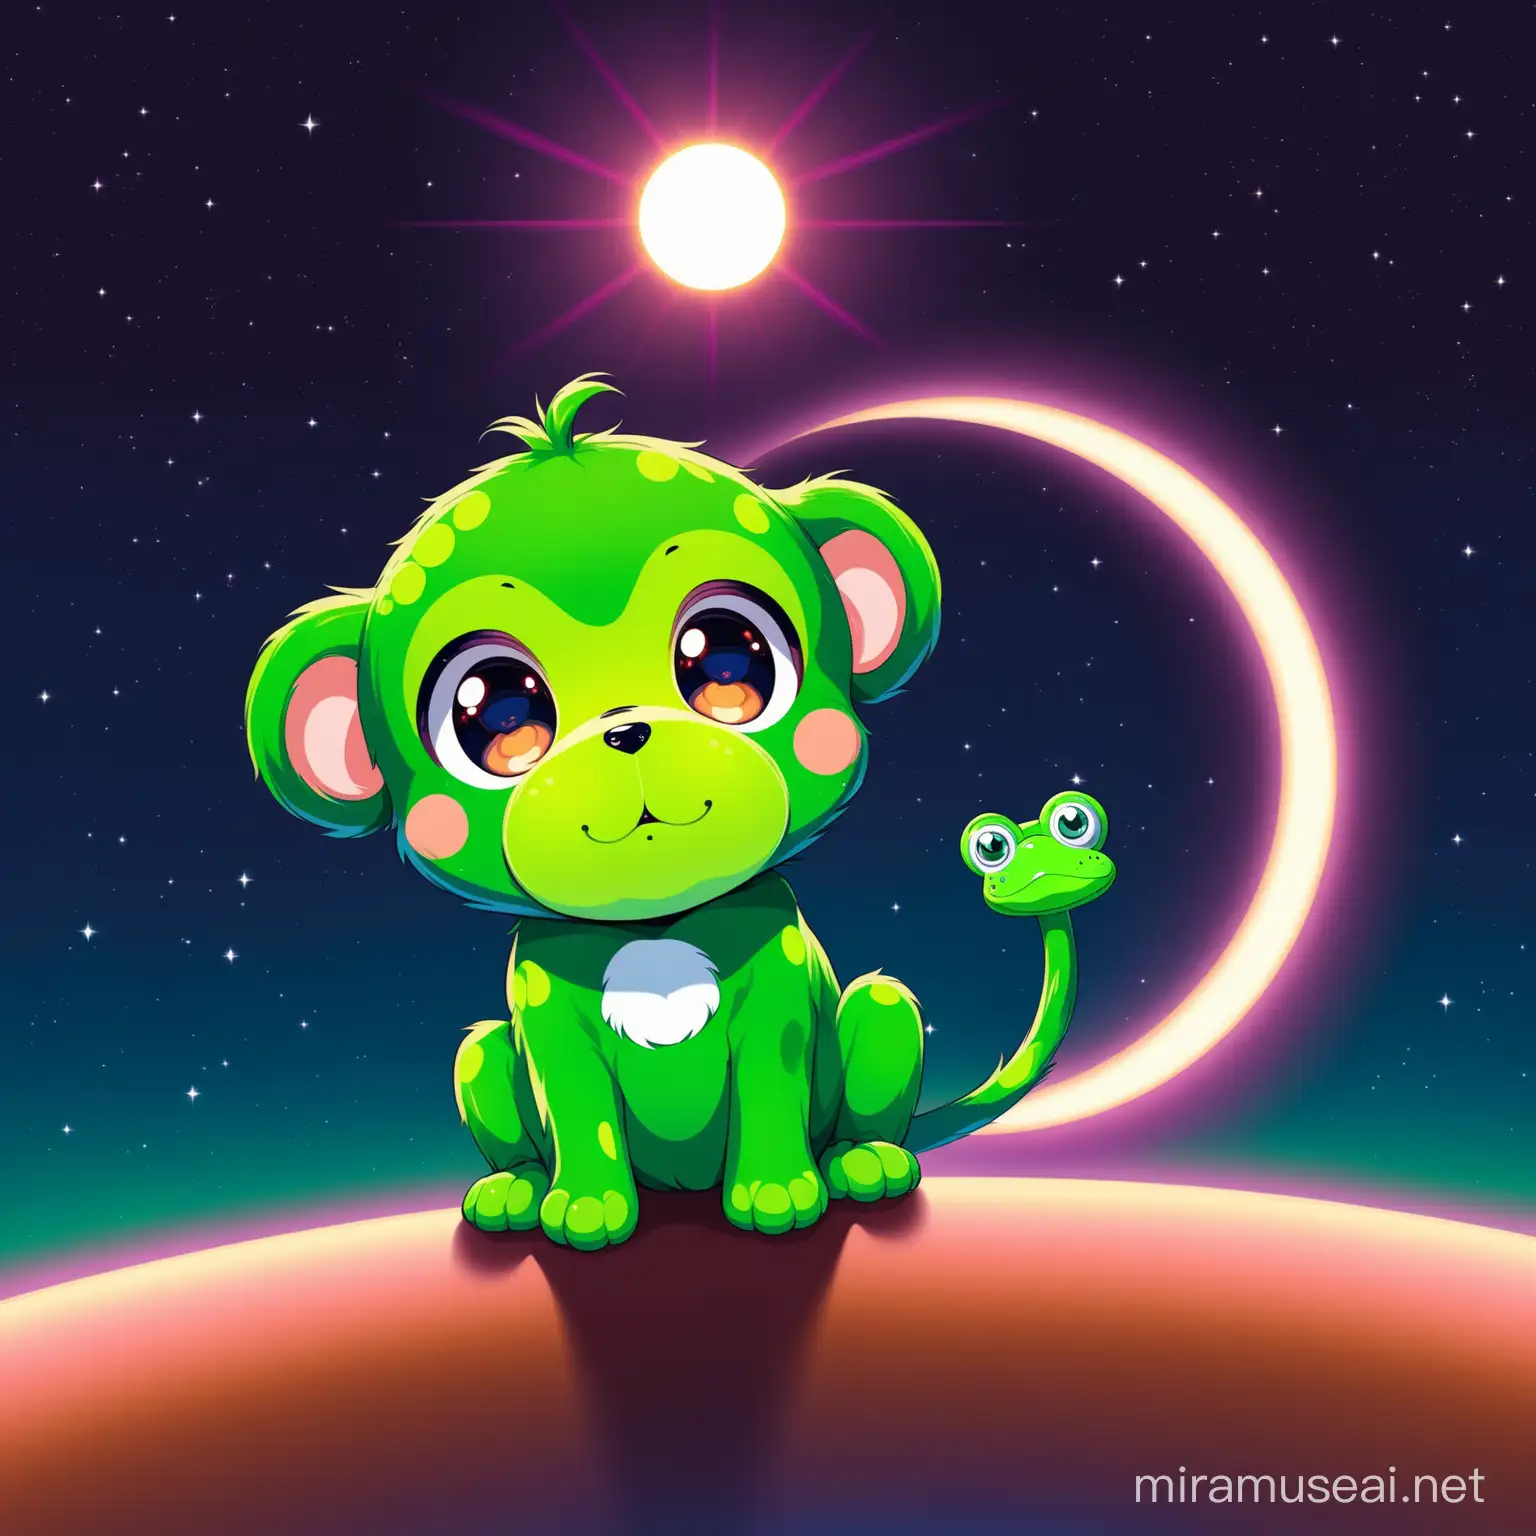 puppy with monkey tail with a frog face staring at a solar eclipse, use blue pink and green colors




